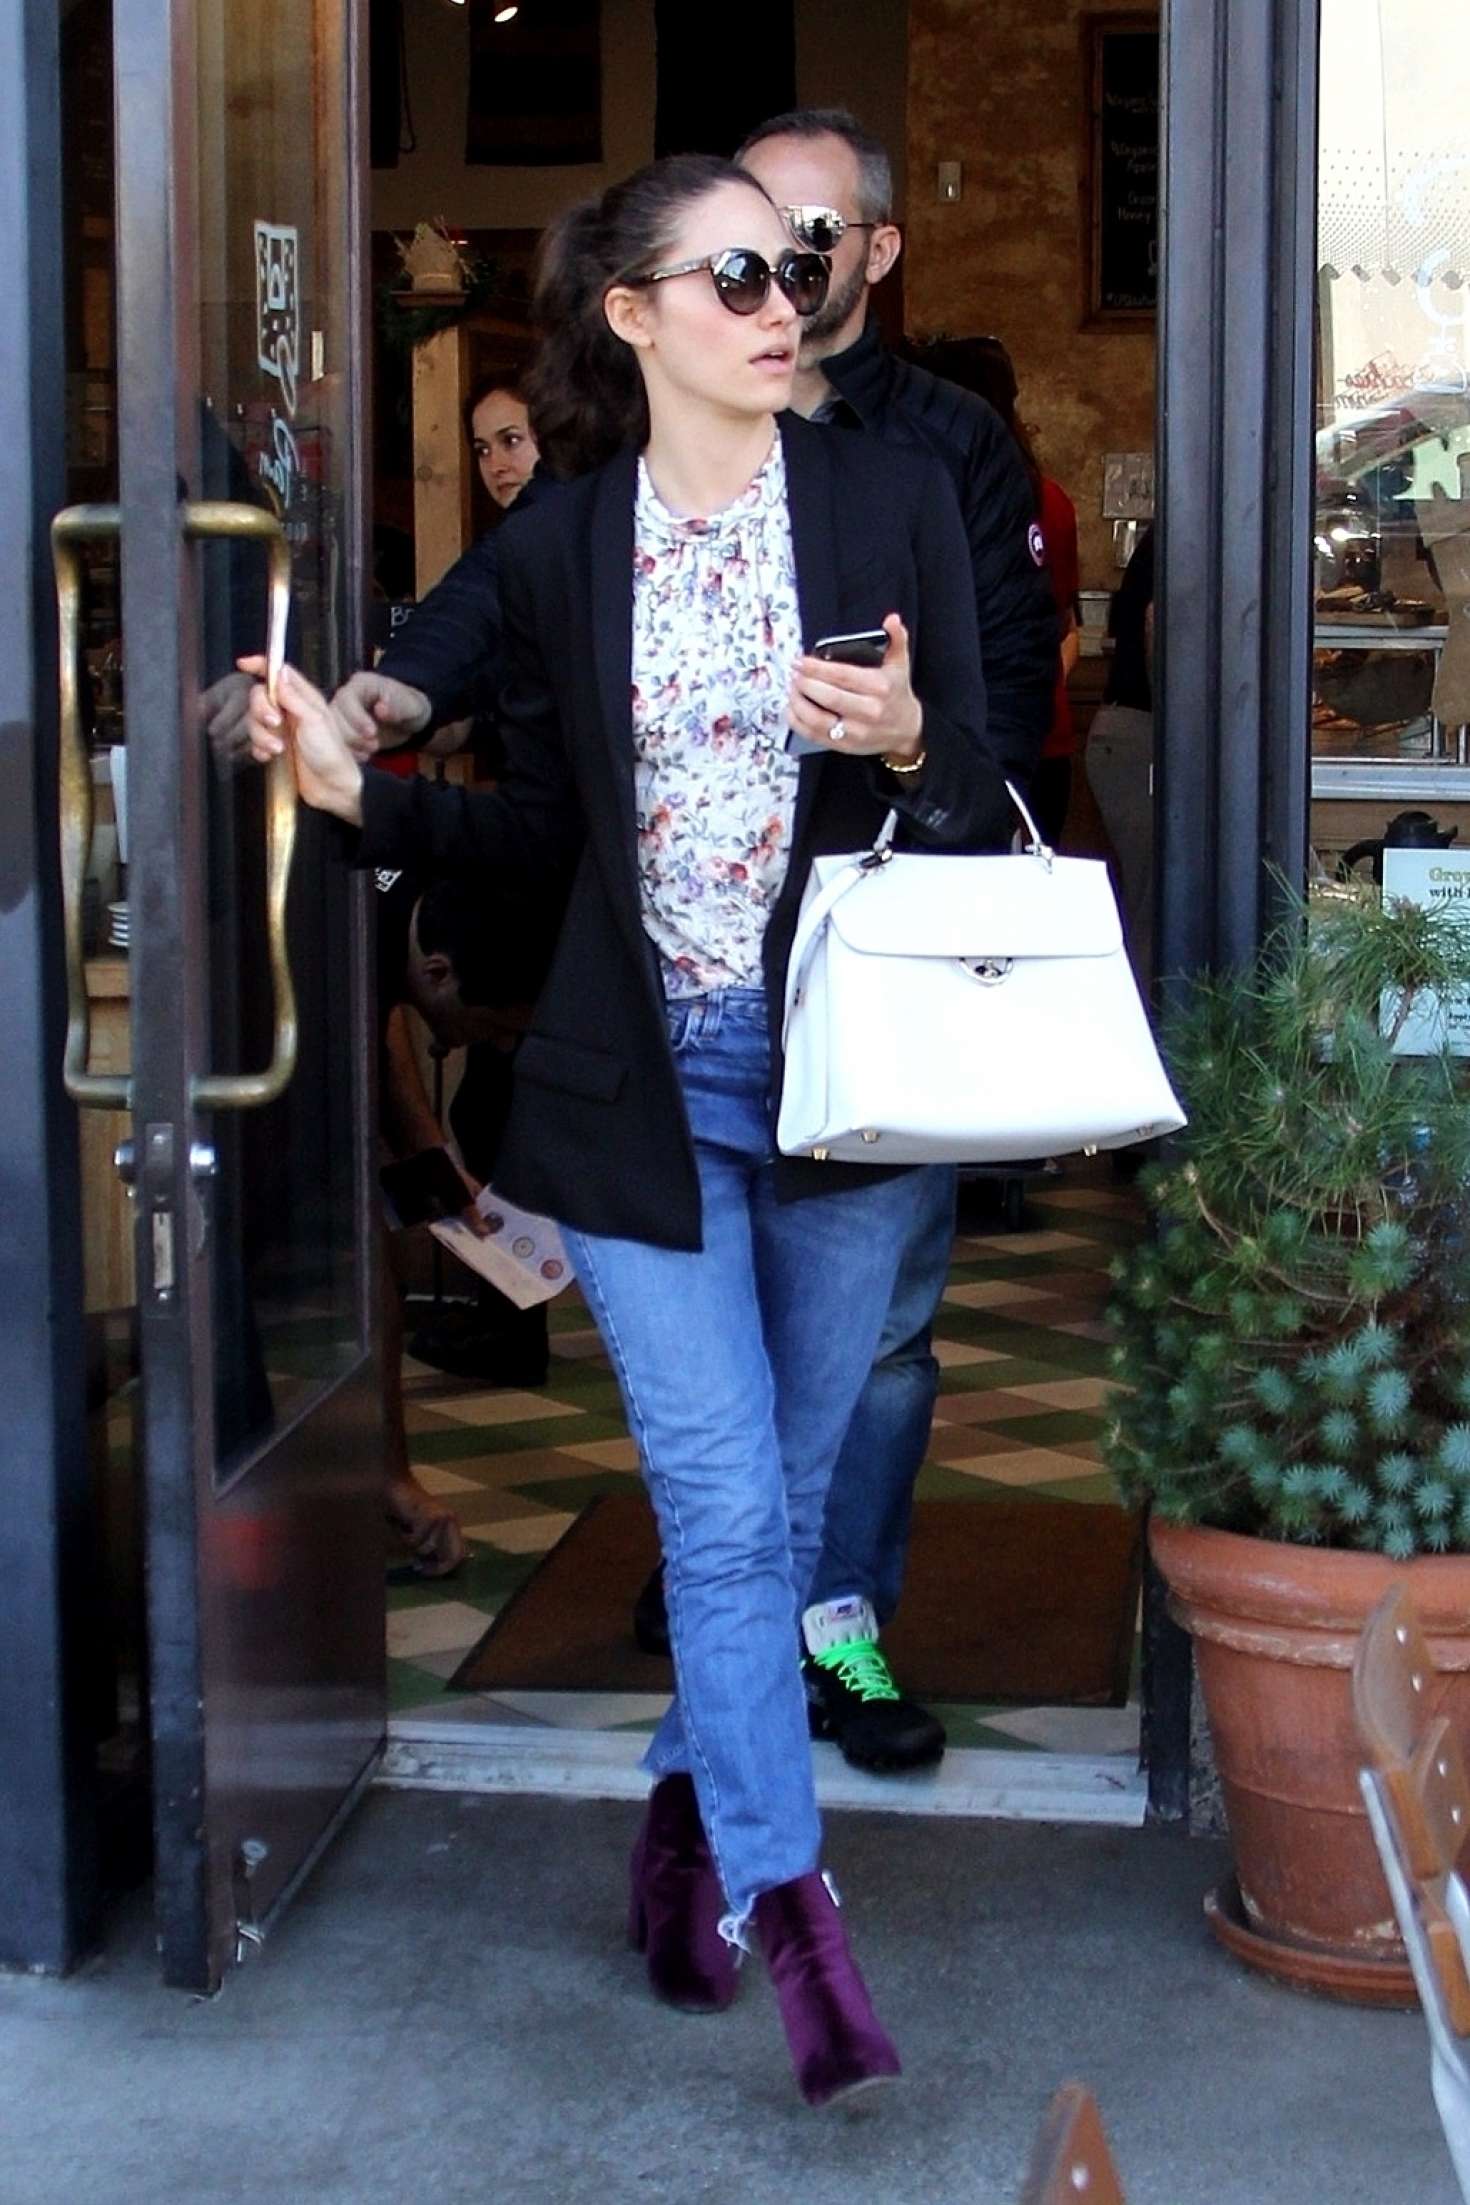 Emmy Rossum – Out for lunch at Le Pain Quotidien in LA | GotCeleb